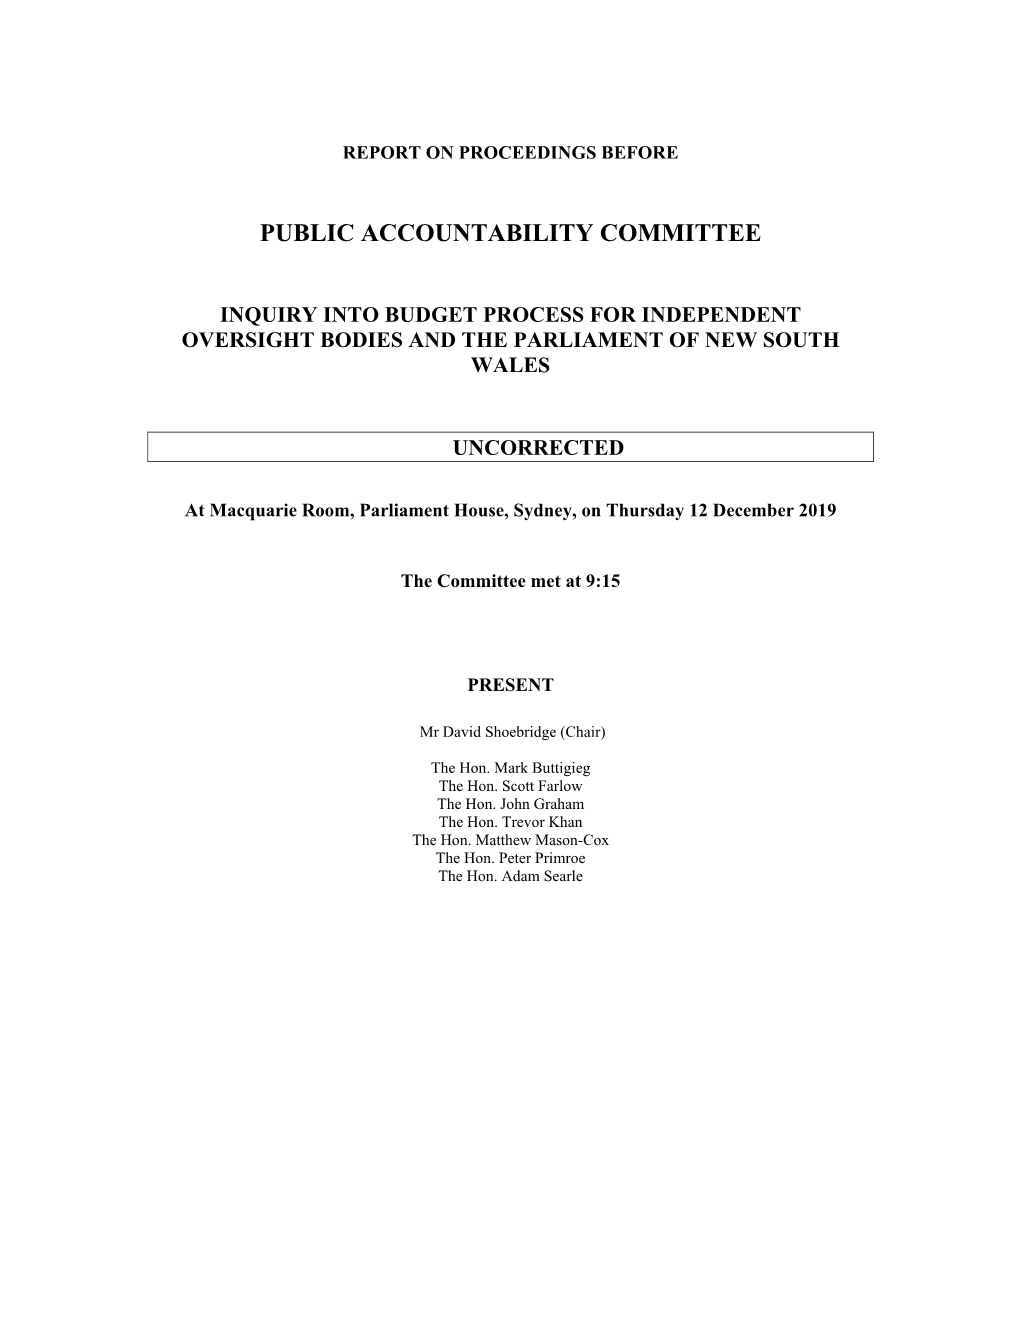 Public Accountability Committee